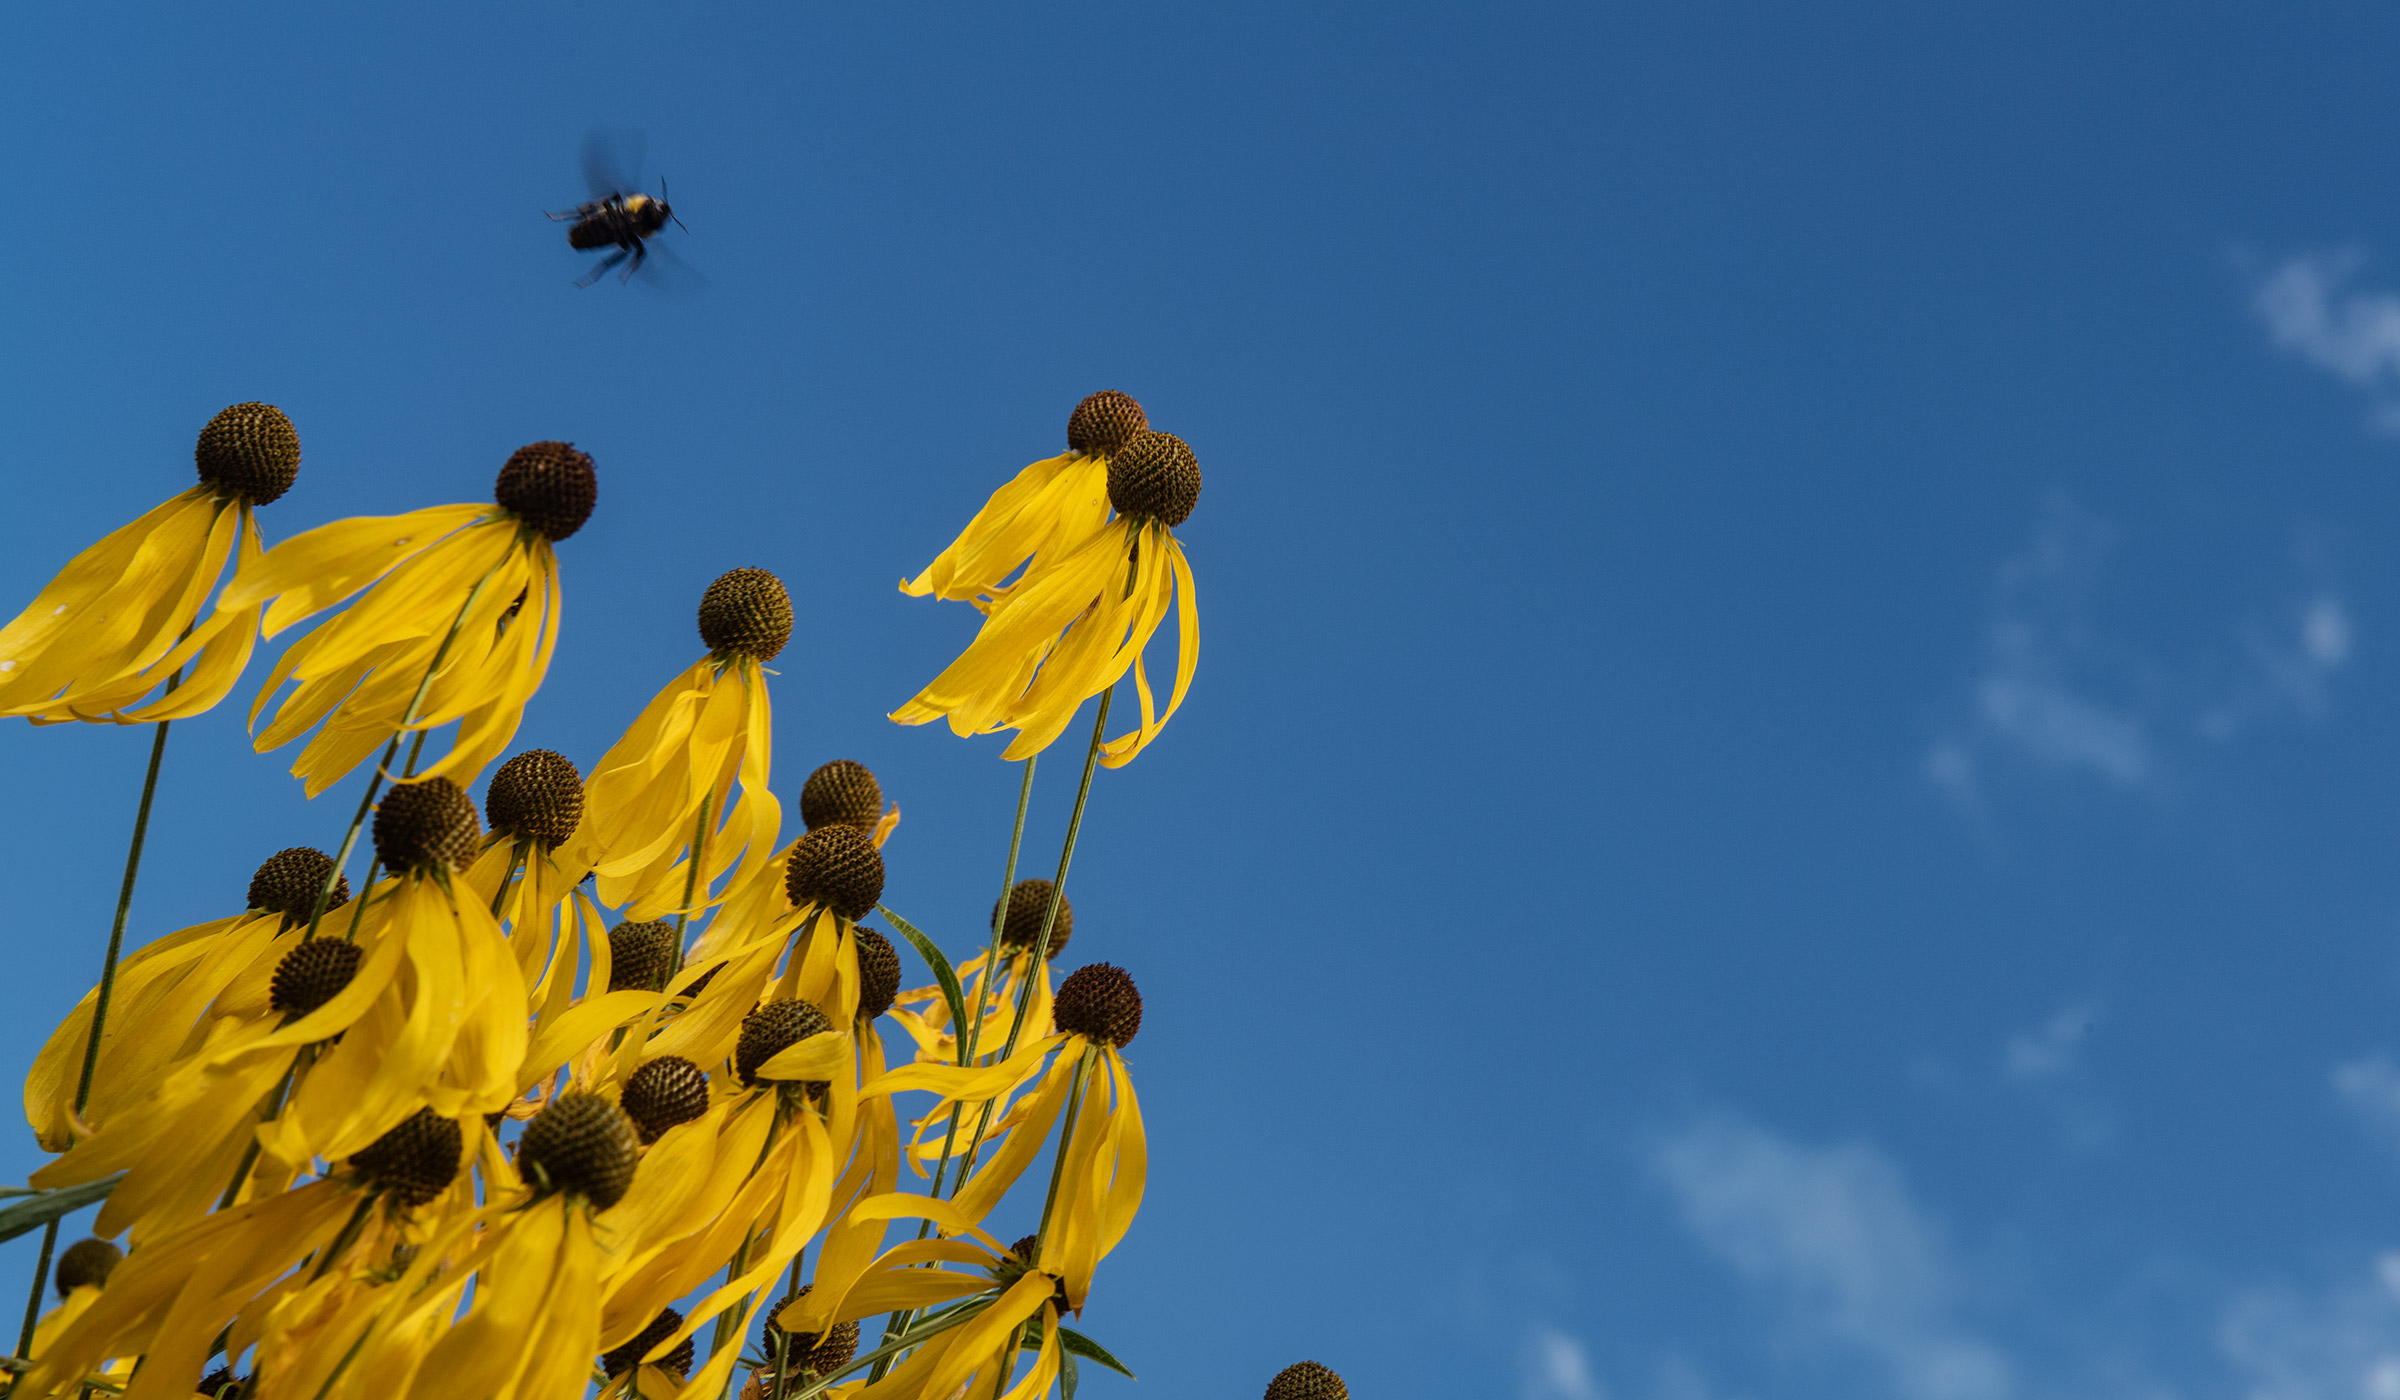 Against a blue sky, a bee flies over a crowd of gray headed prairie coneflowers in Entomology&#039;s Black Prairie Pollination Garden